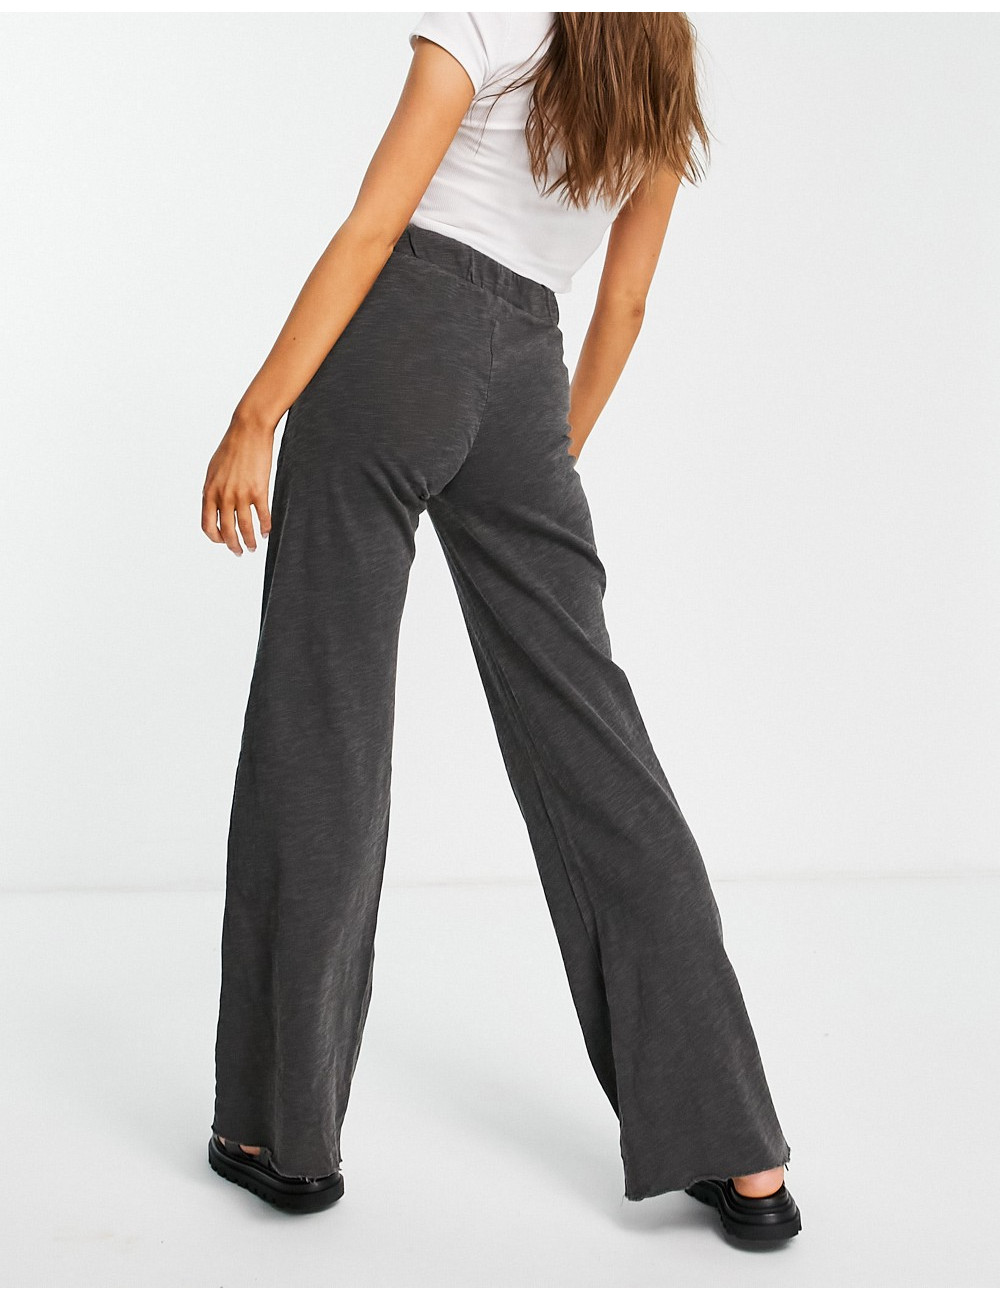 Cotton:On wide leg pant in...